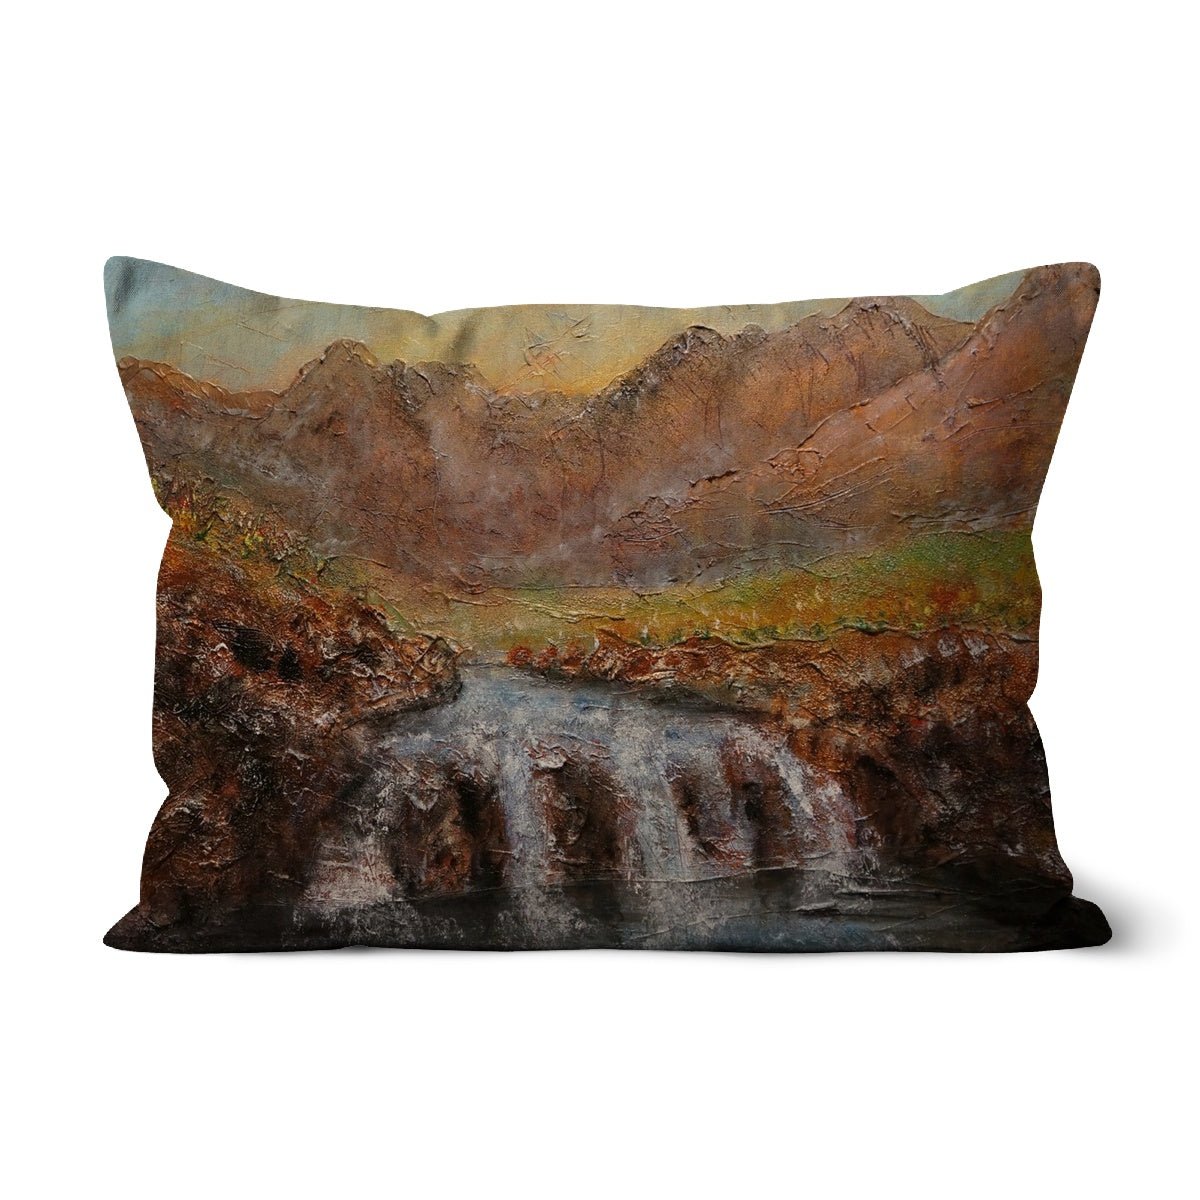 Fairy Pools Dawn Skye Art Gifts Cushion-Cushions-Skye Art Gallery-Canvas-19"x13"-Paintings, Prints, Homeware, Art Gifts From Scotland By Scottish Artist Kevin Hunter